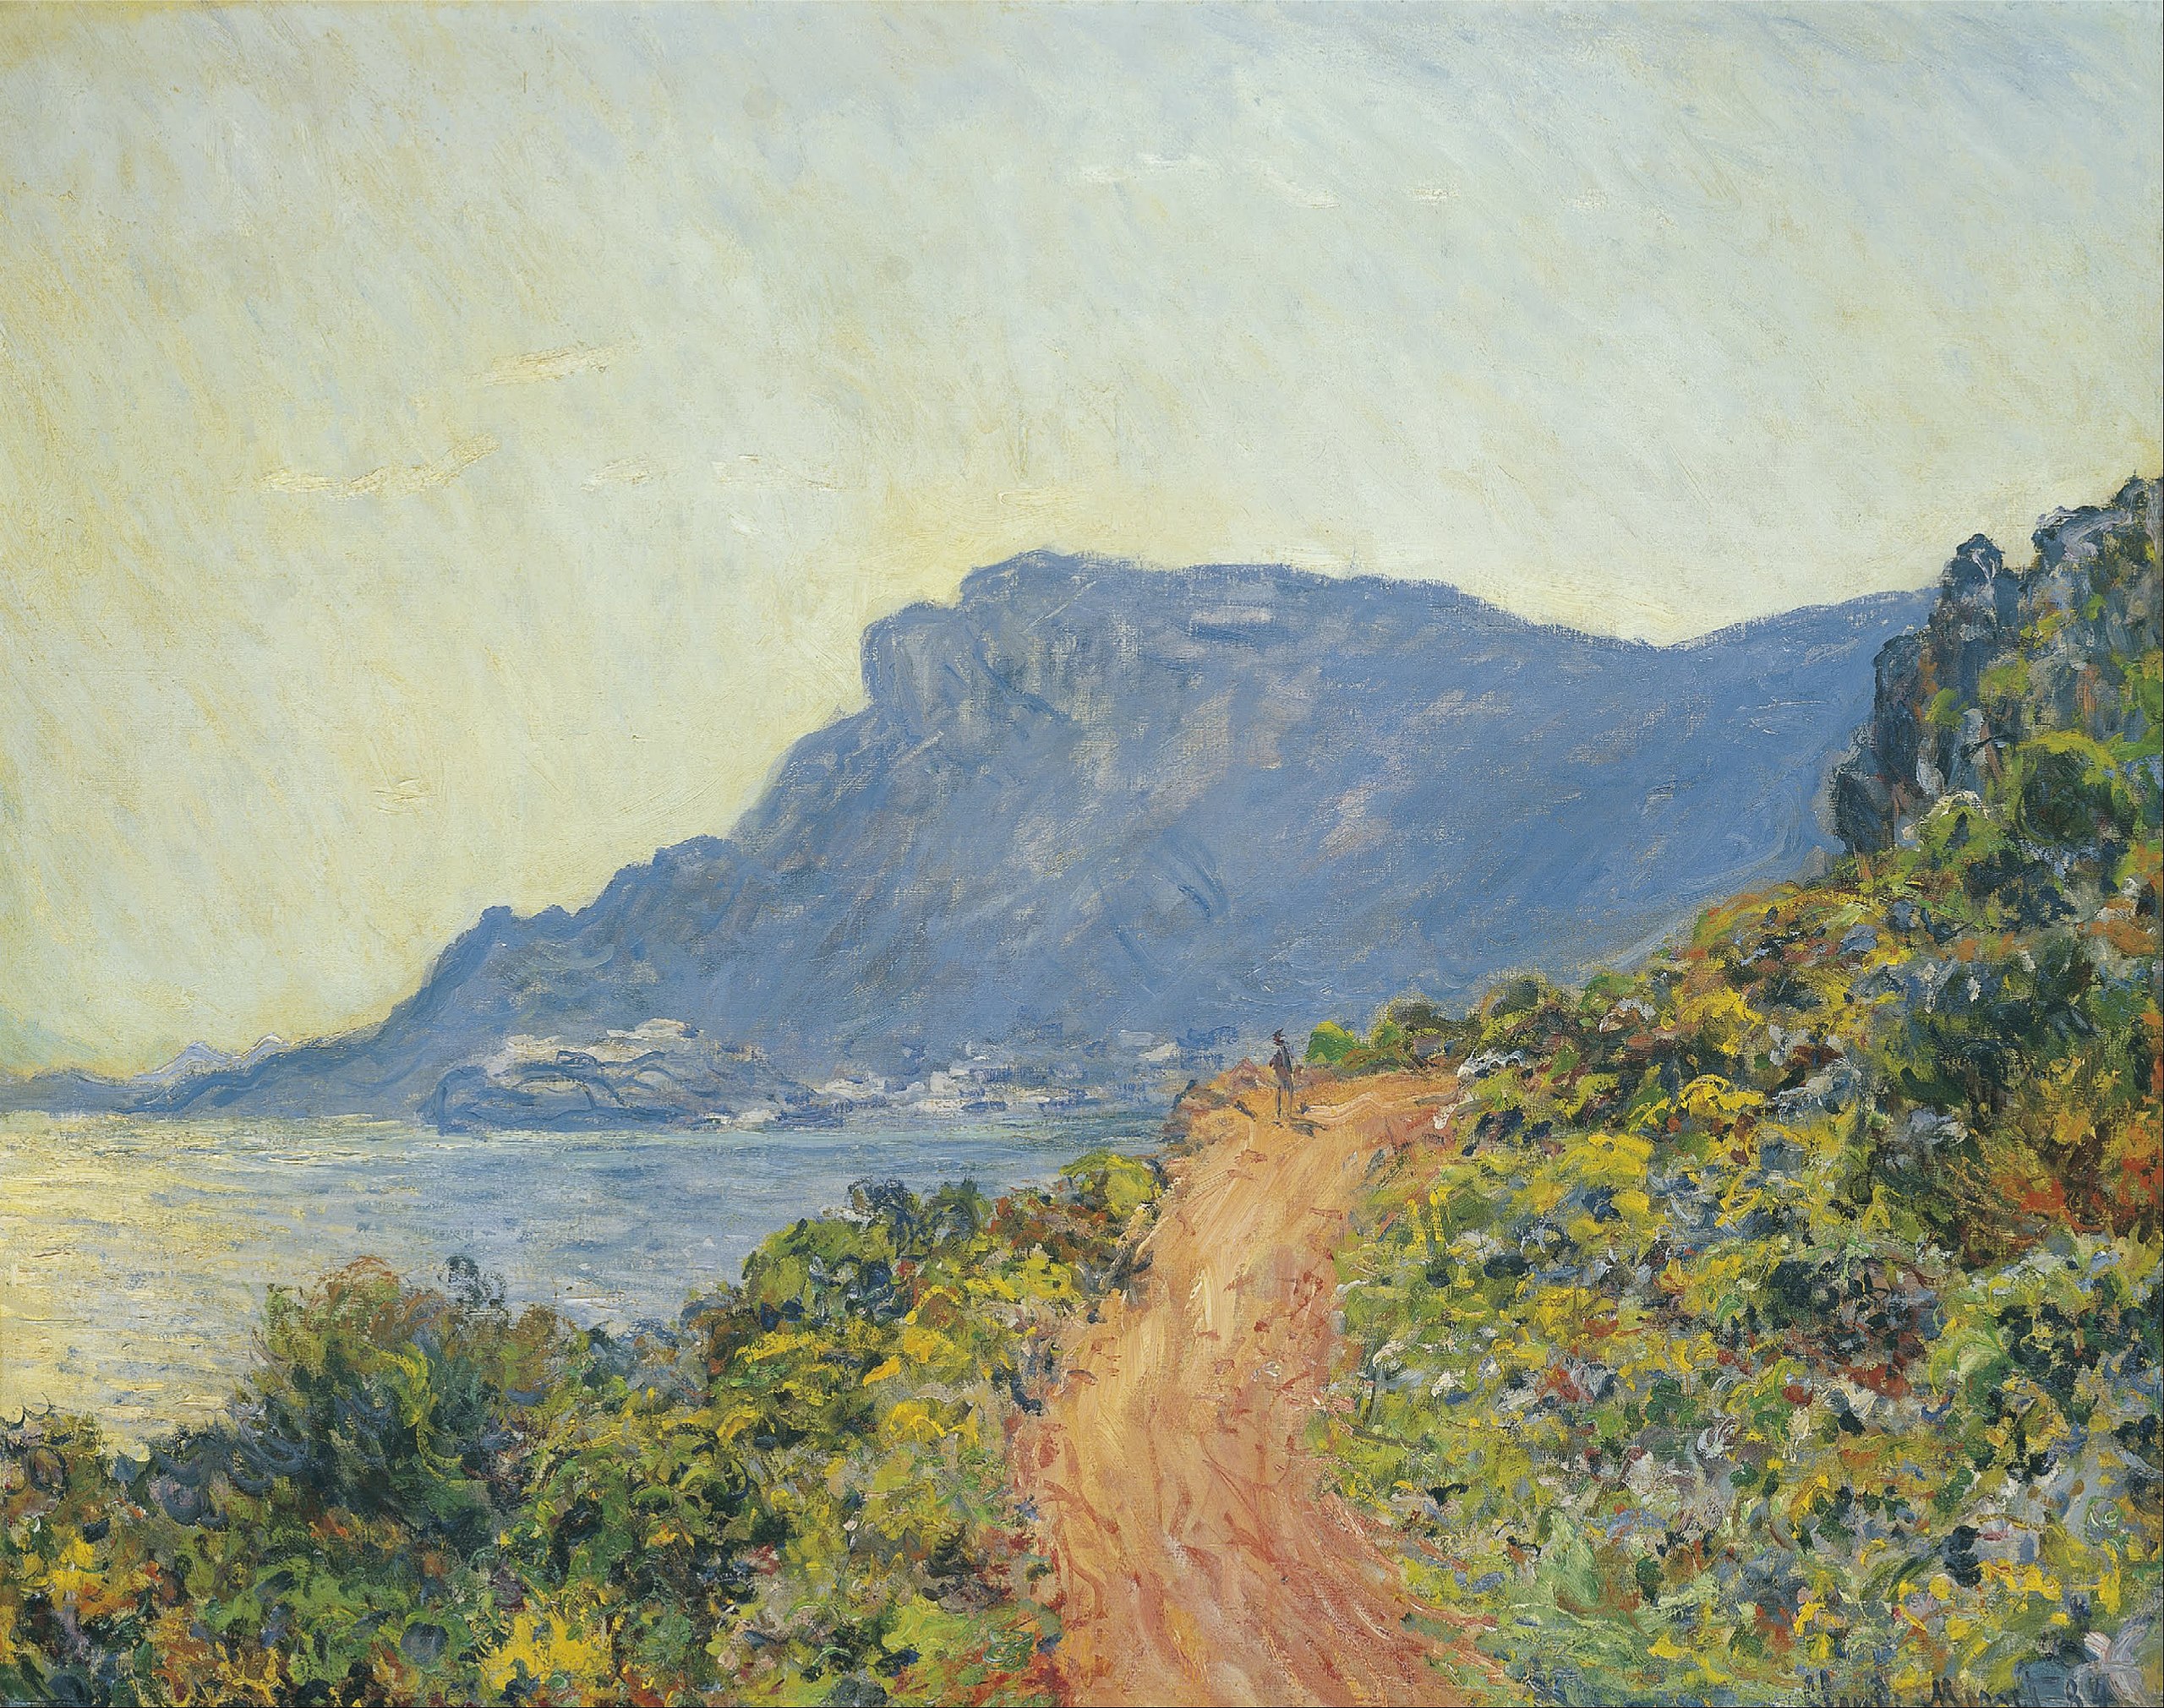 A landscape view of a small dirt road in a grassy area overlooking the sea with a mountain in the distance